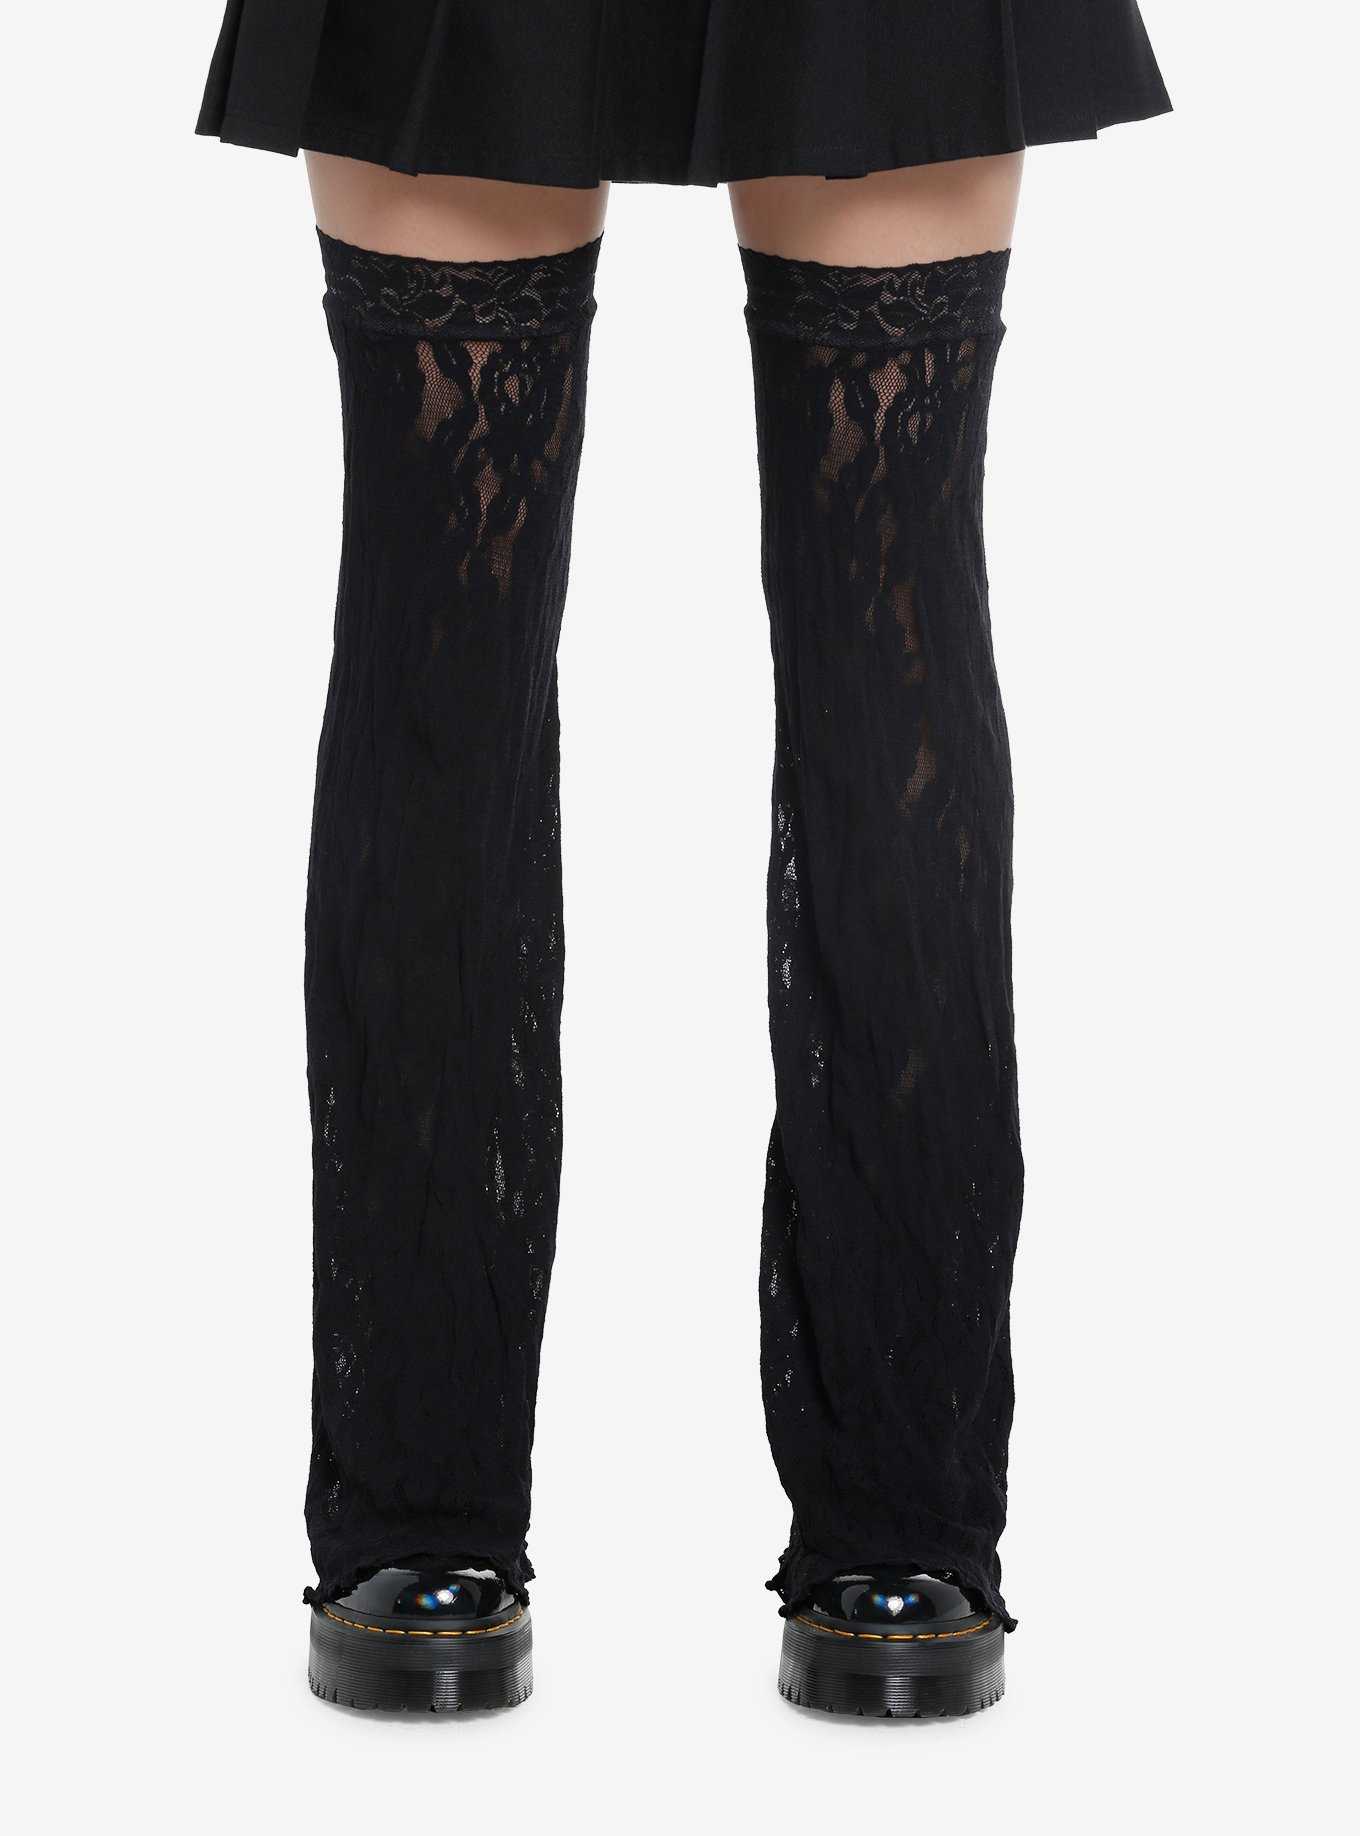 Black Floral Lace Flared Leg Warmers, , hi-res